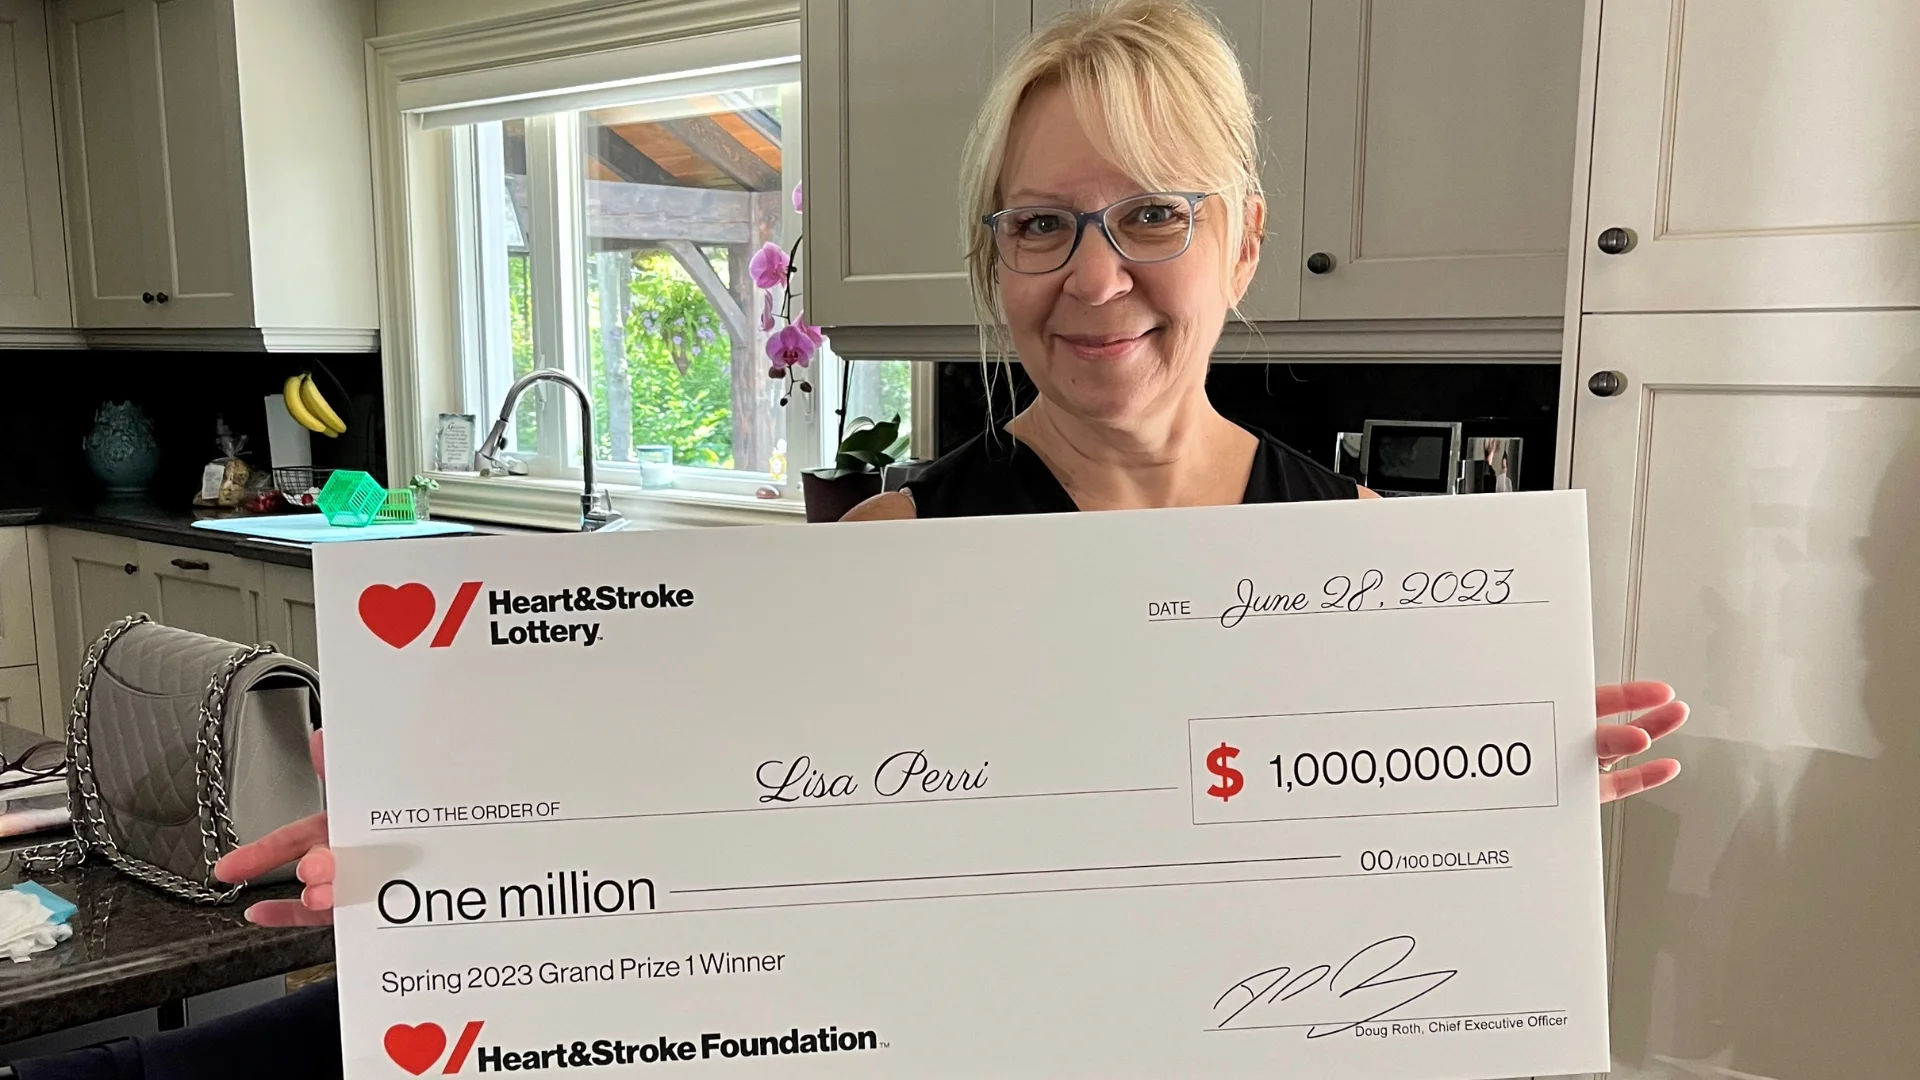 Grand Prize lottery winner Lisa Perri holds a cheque for $1,000,000